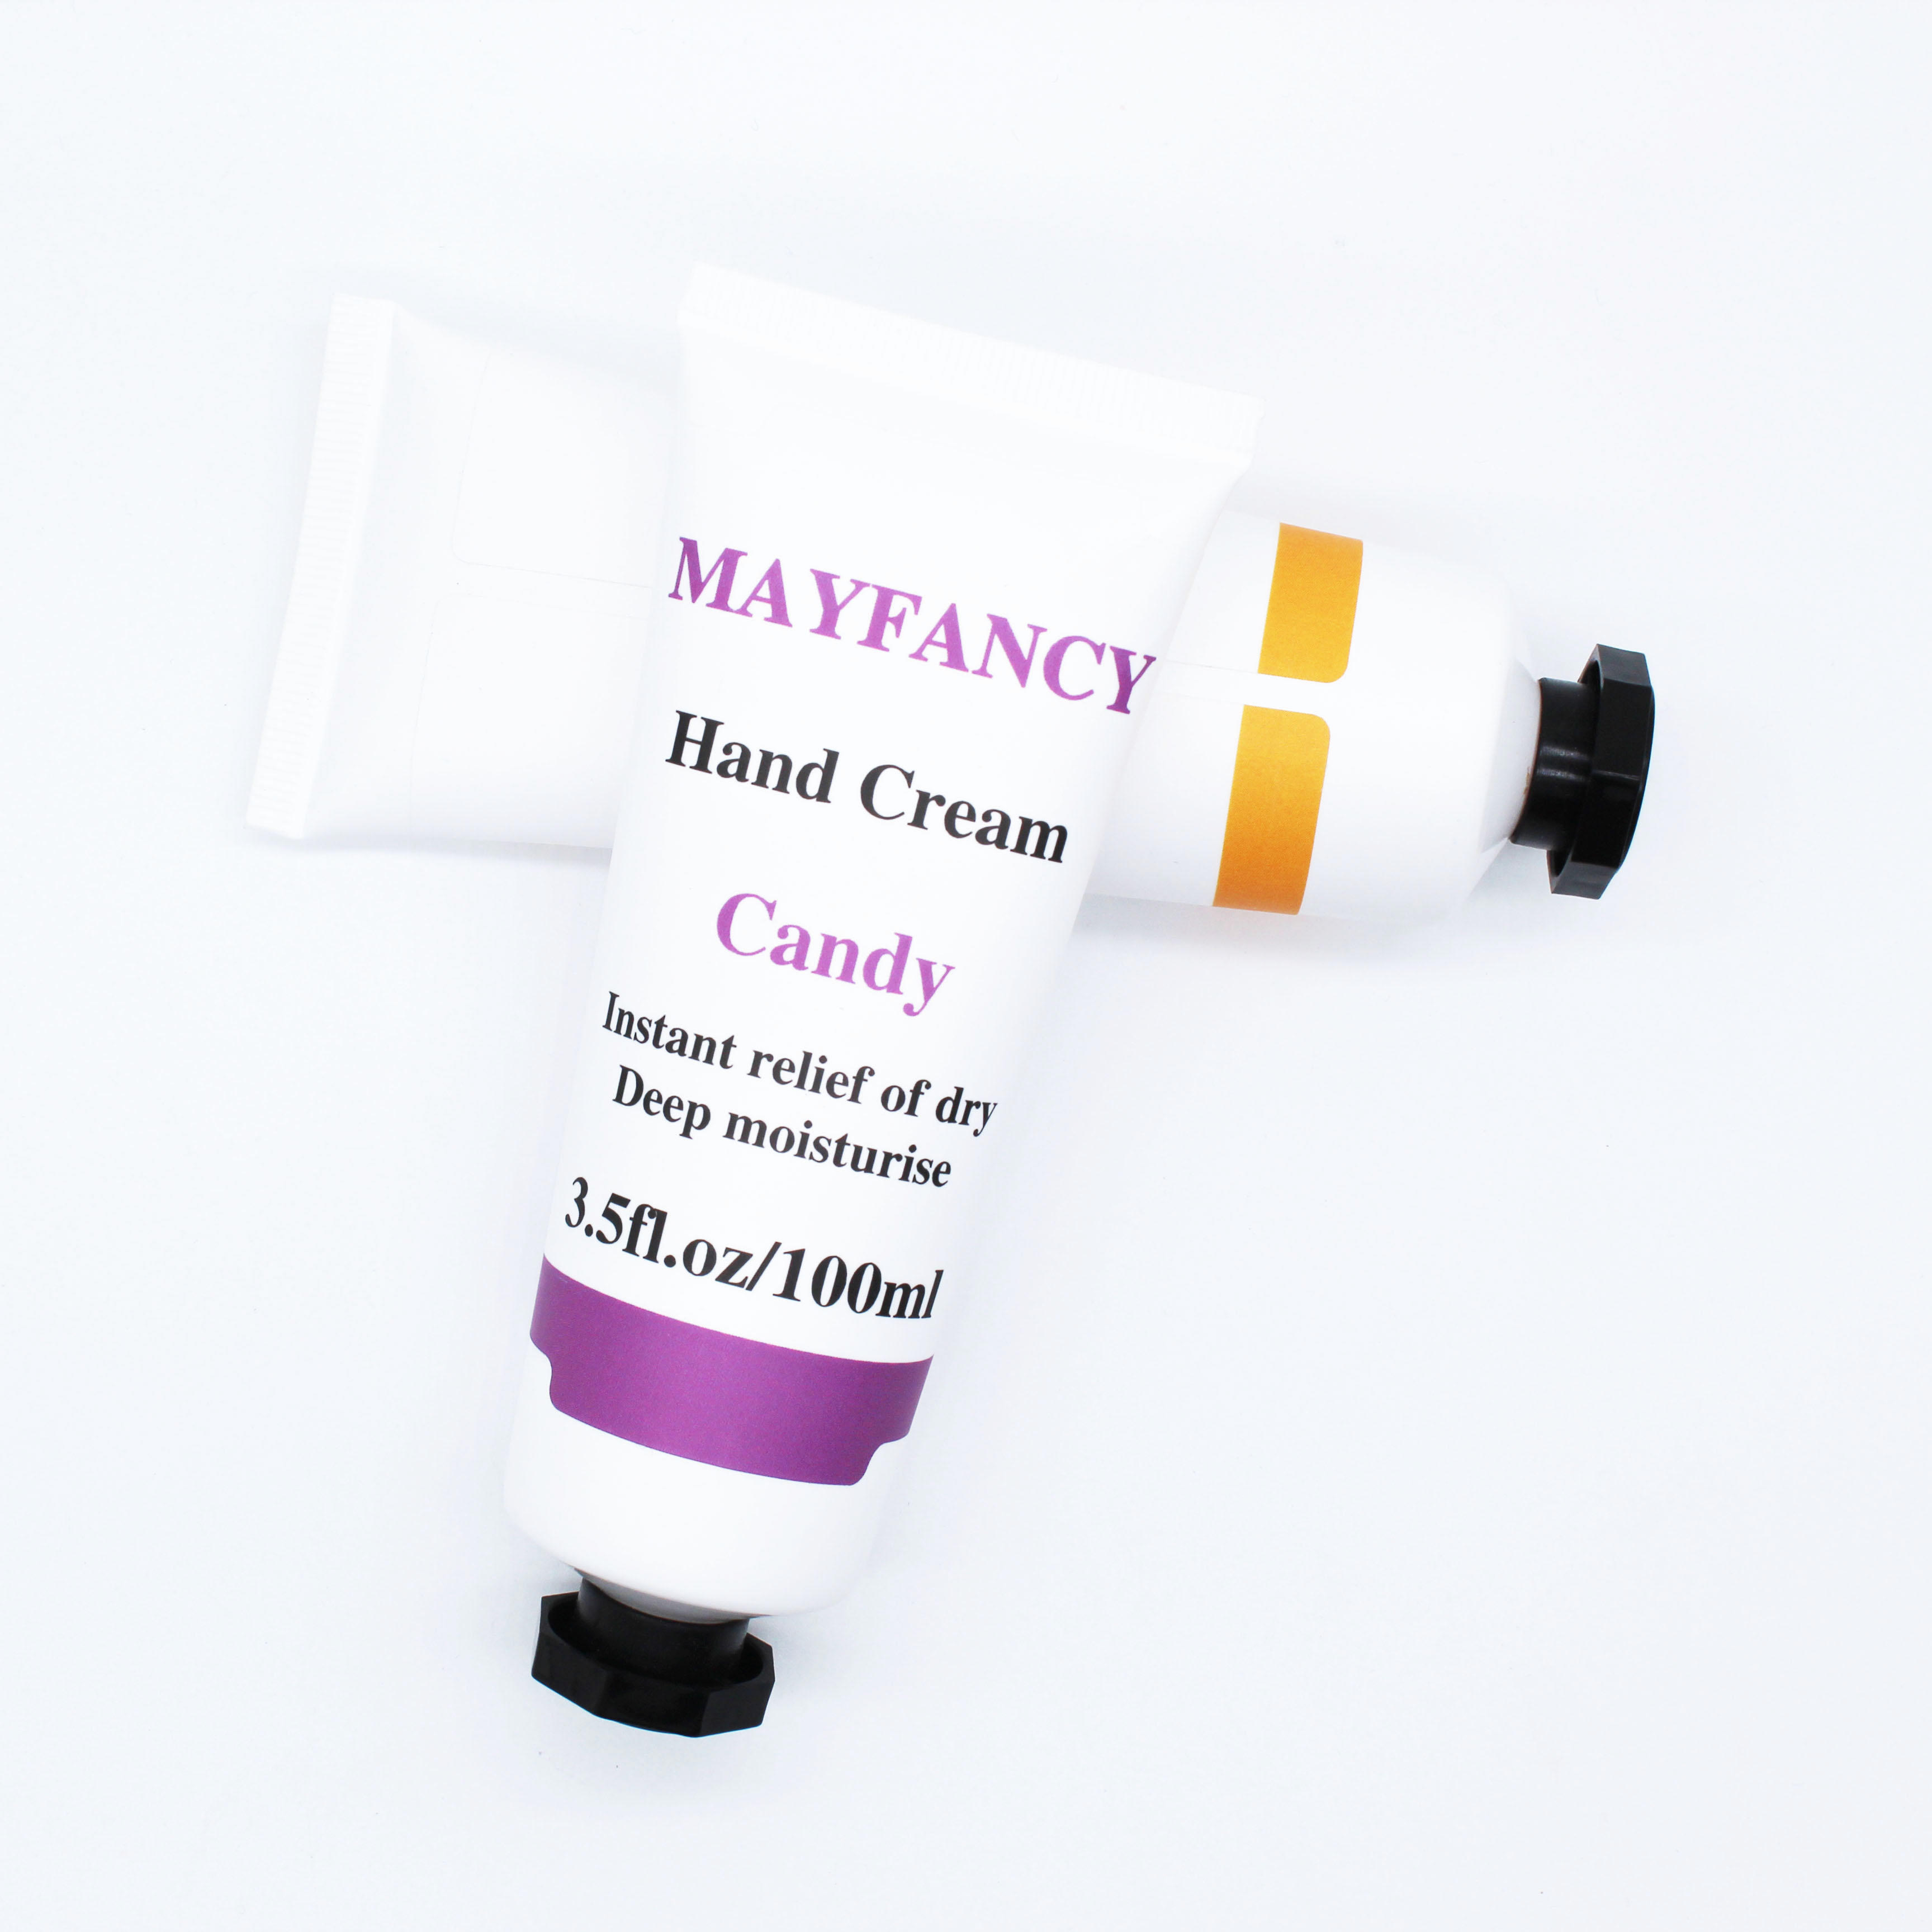 Mayfancy Candy Hand Cream